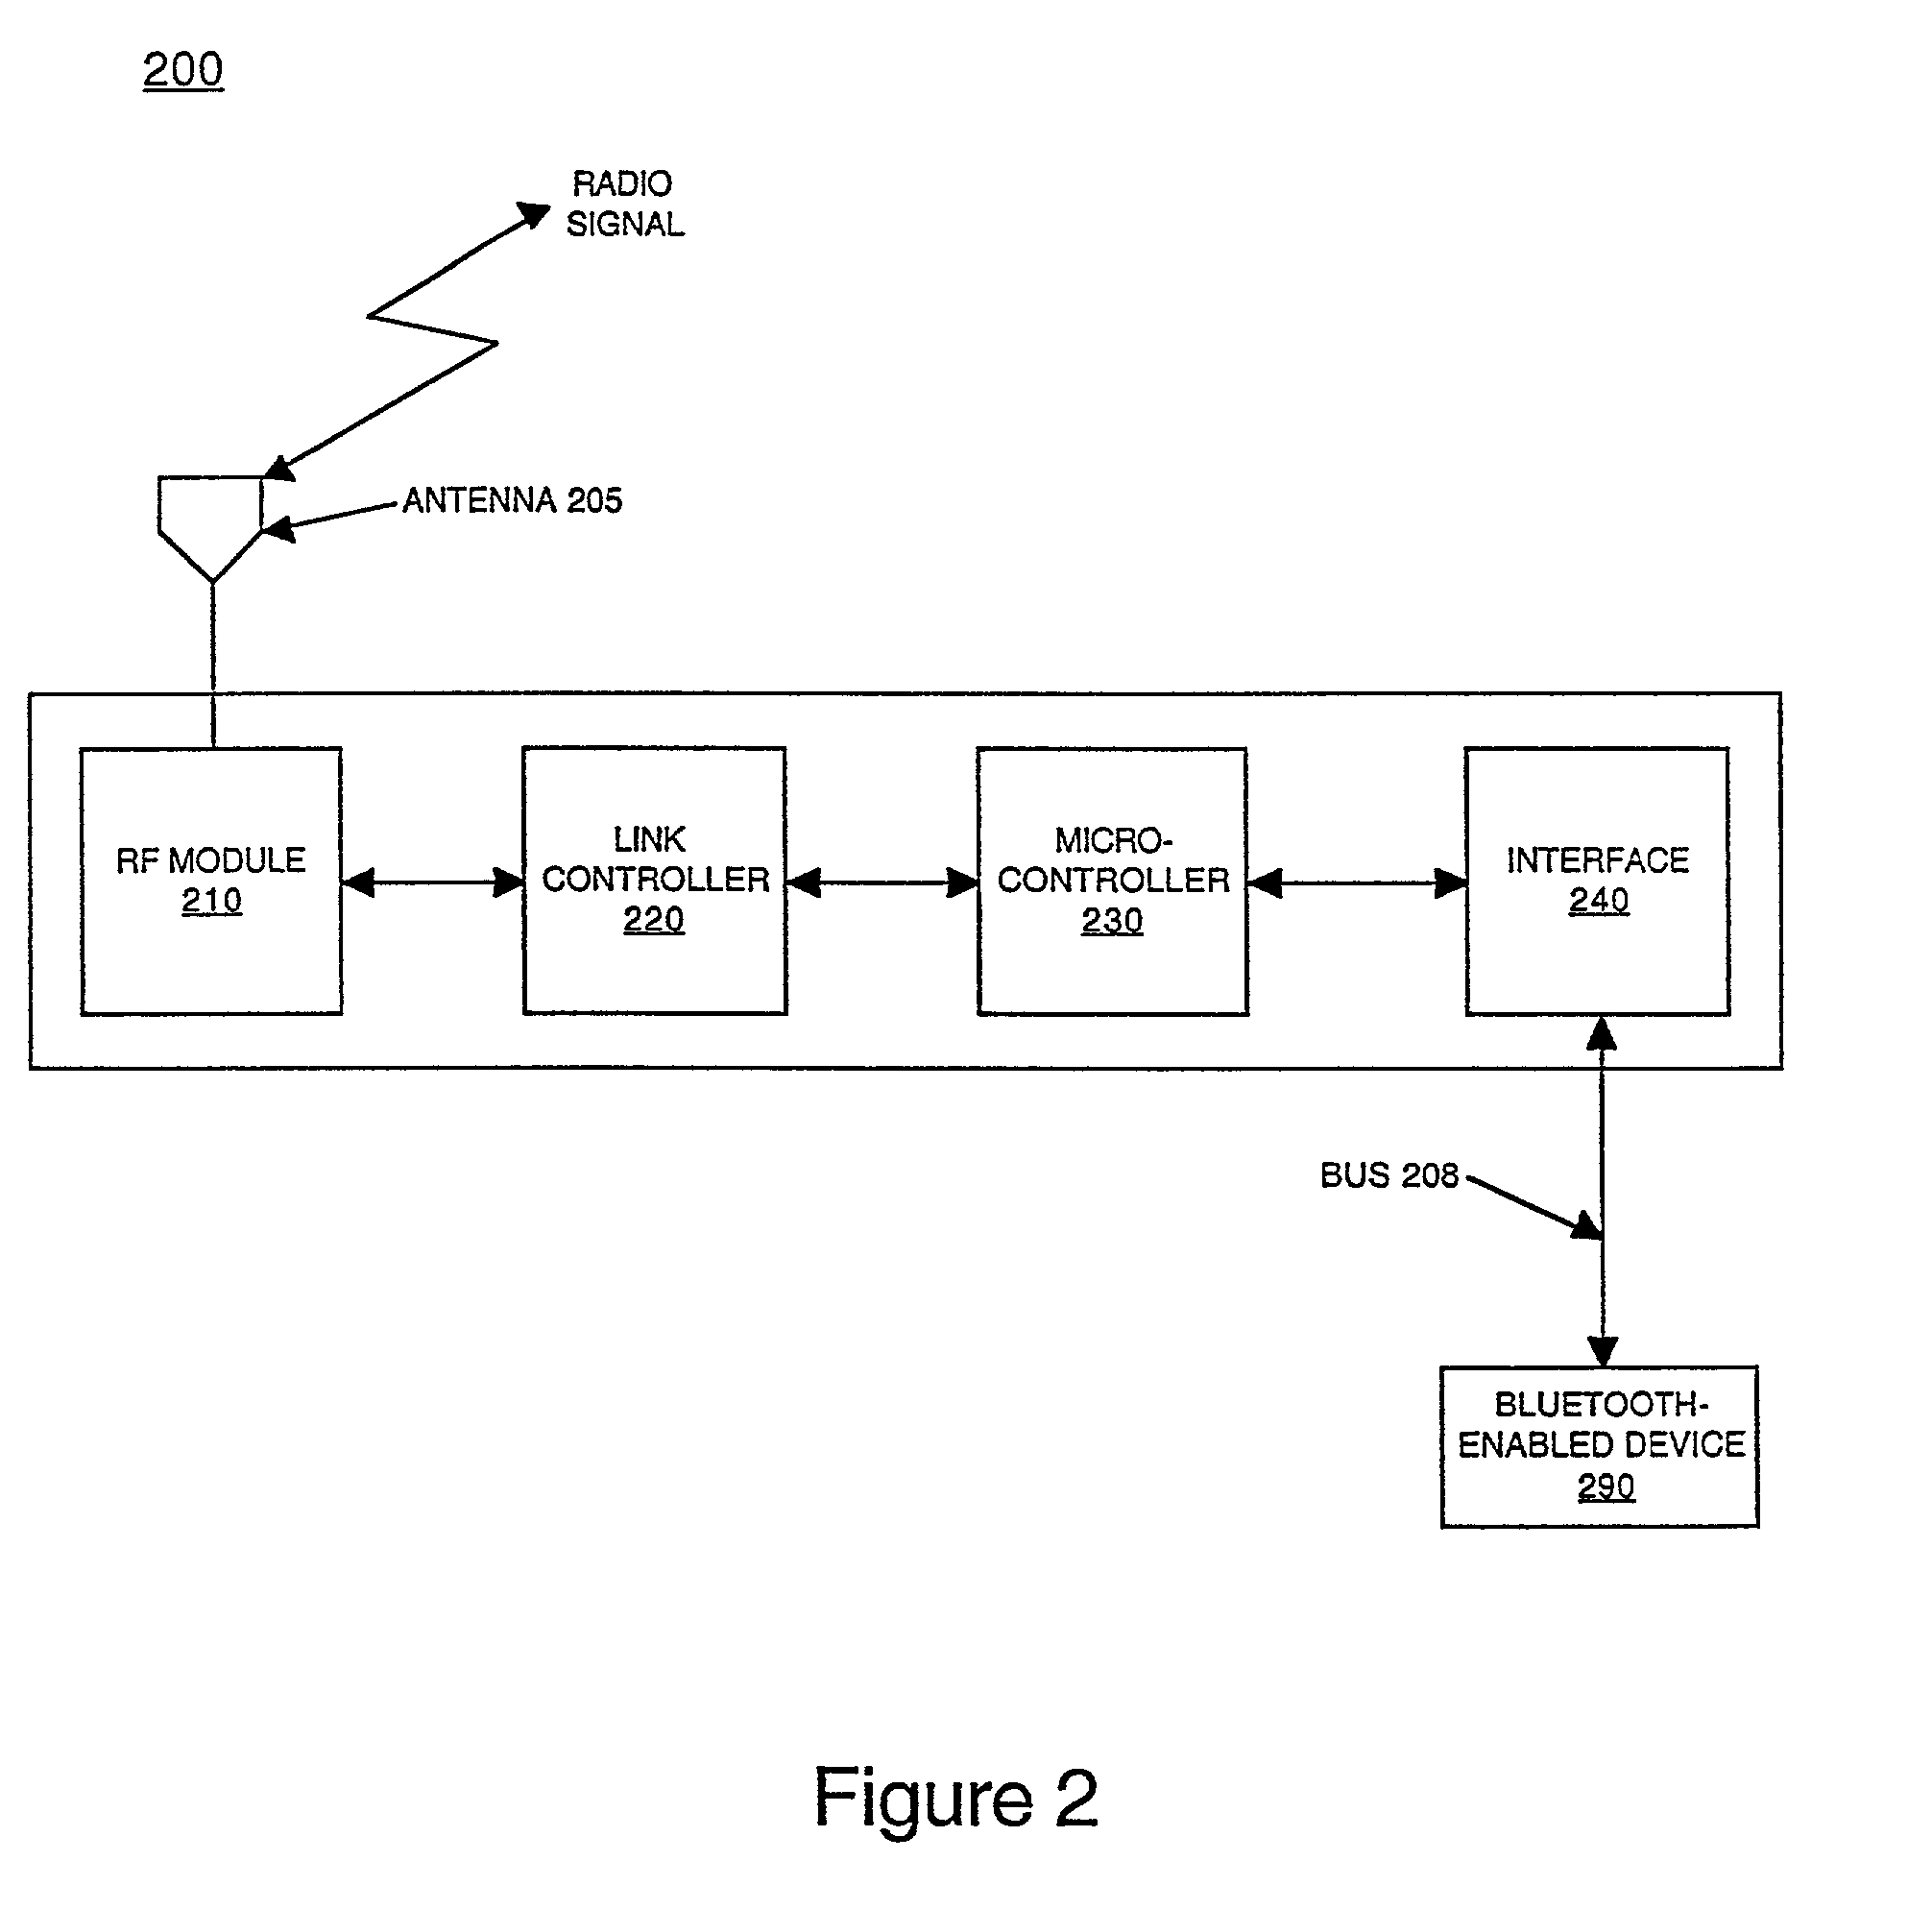 Method and apparatus for opening a virtual serial communications port for establishing a wireless connection in a Bluetooth communications network